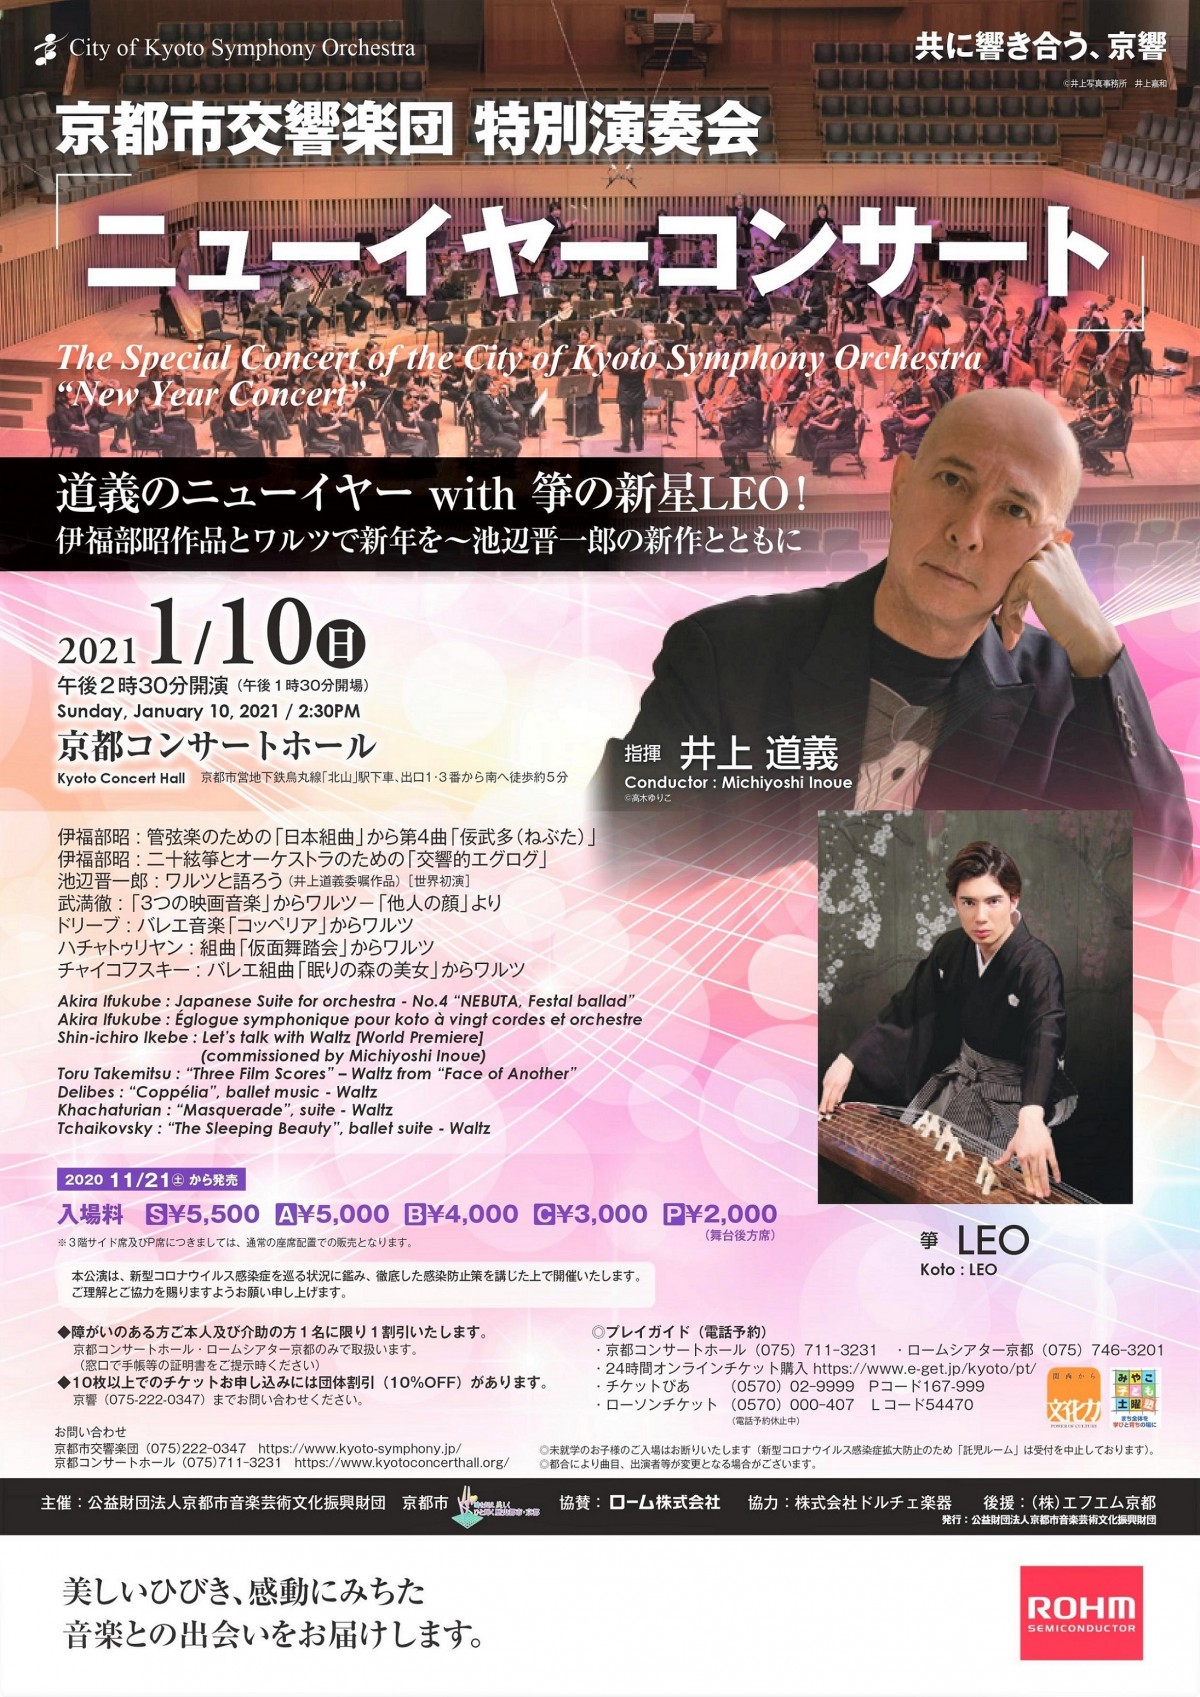 ＜SOLD OUT !＞The Special Concert 